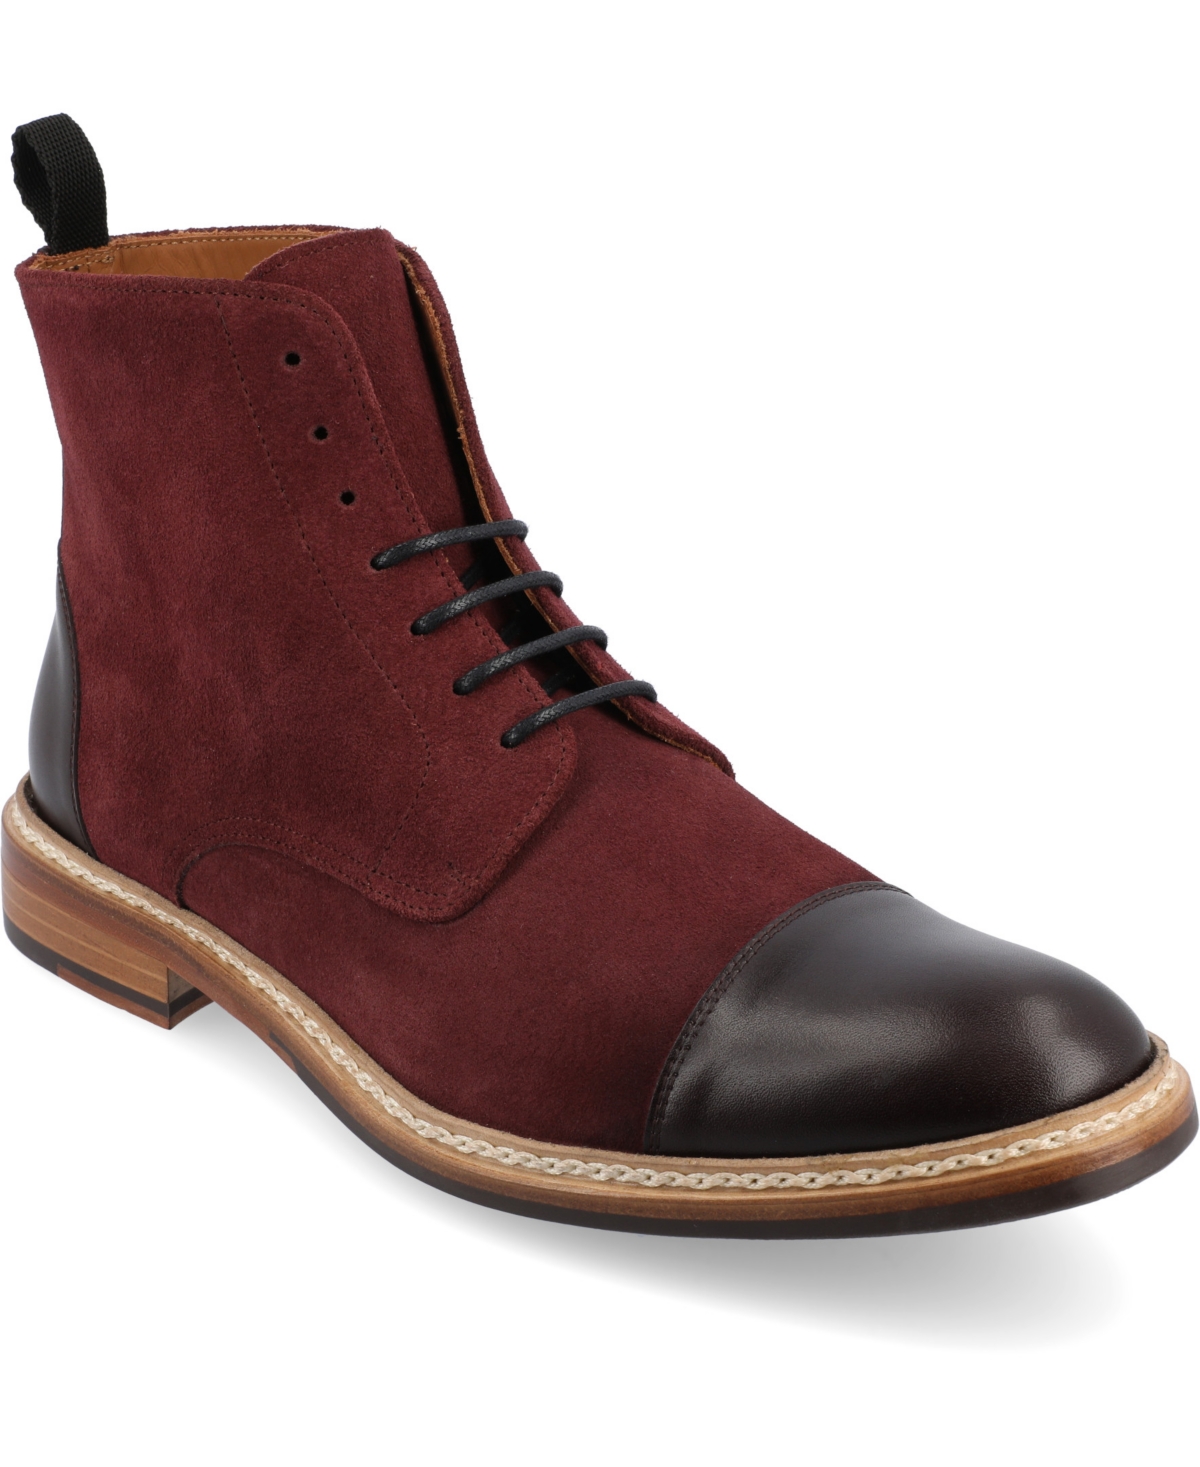 Men's The Troy Lace Up Boot - Oxblood